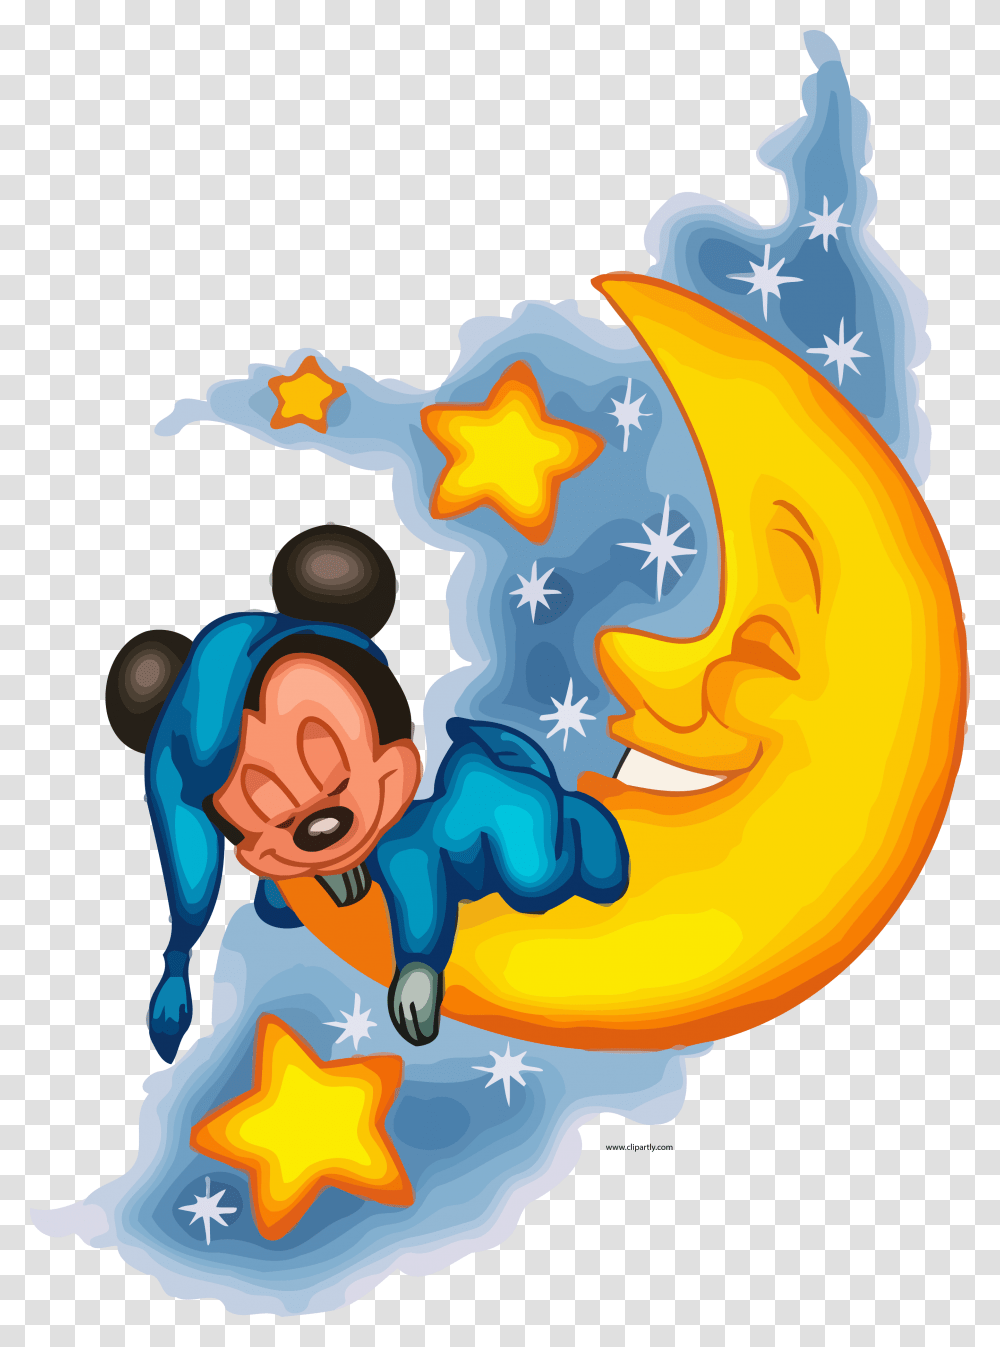 Baby Mickey Mouse Baby Mickey Mouse Sleeping, Star Symbol Transparent Png